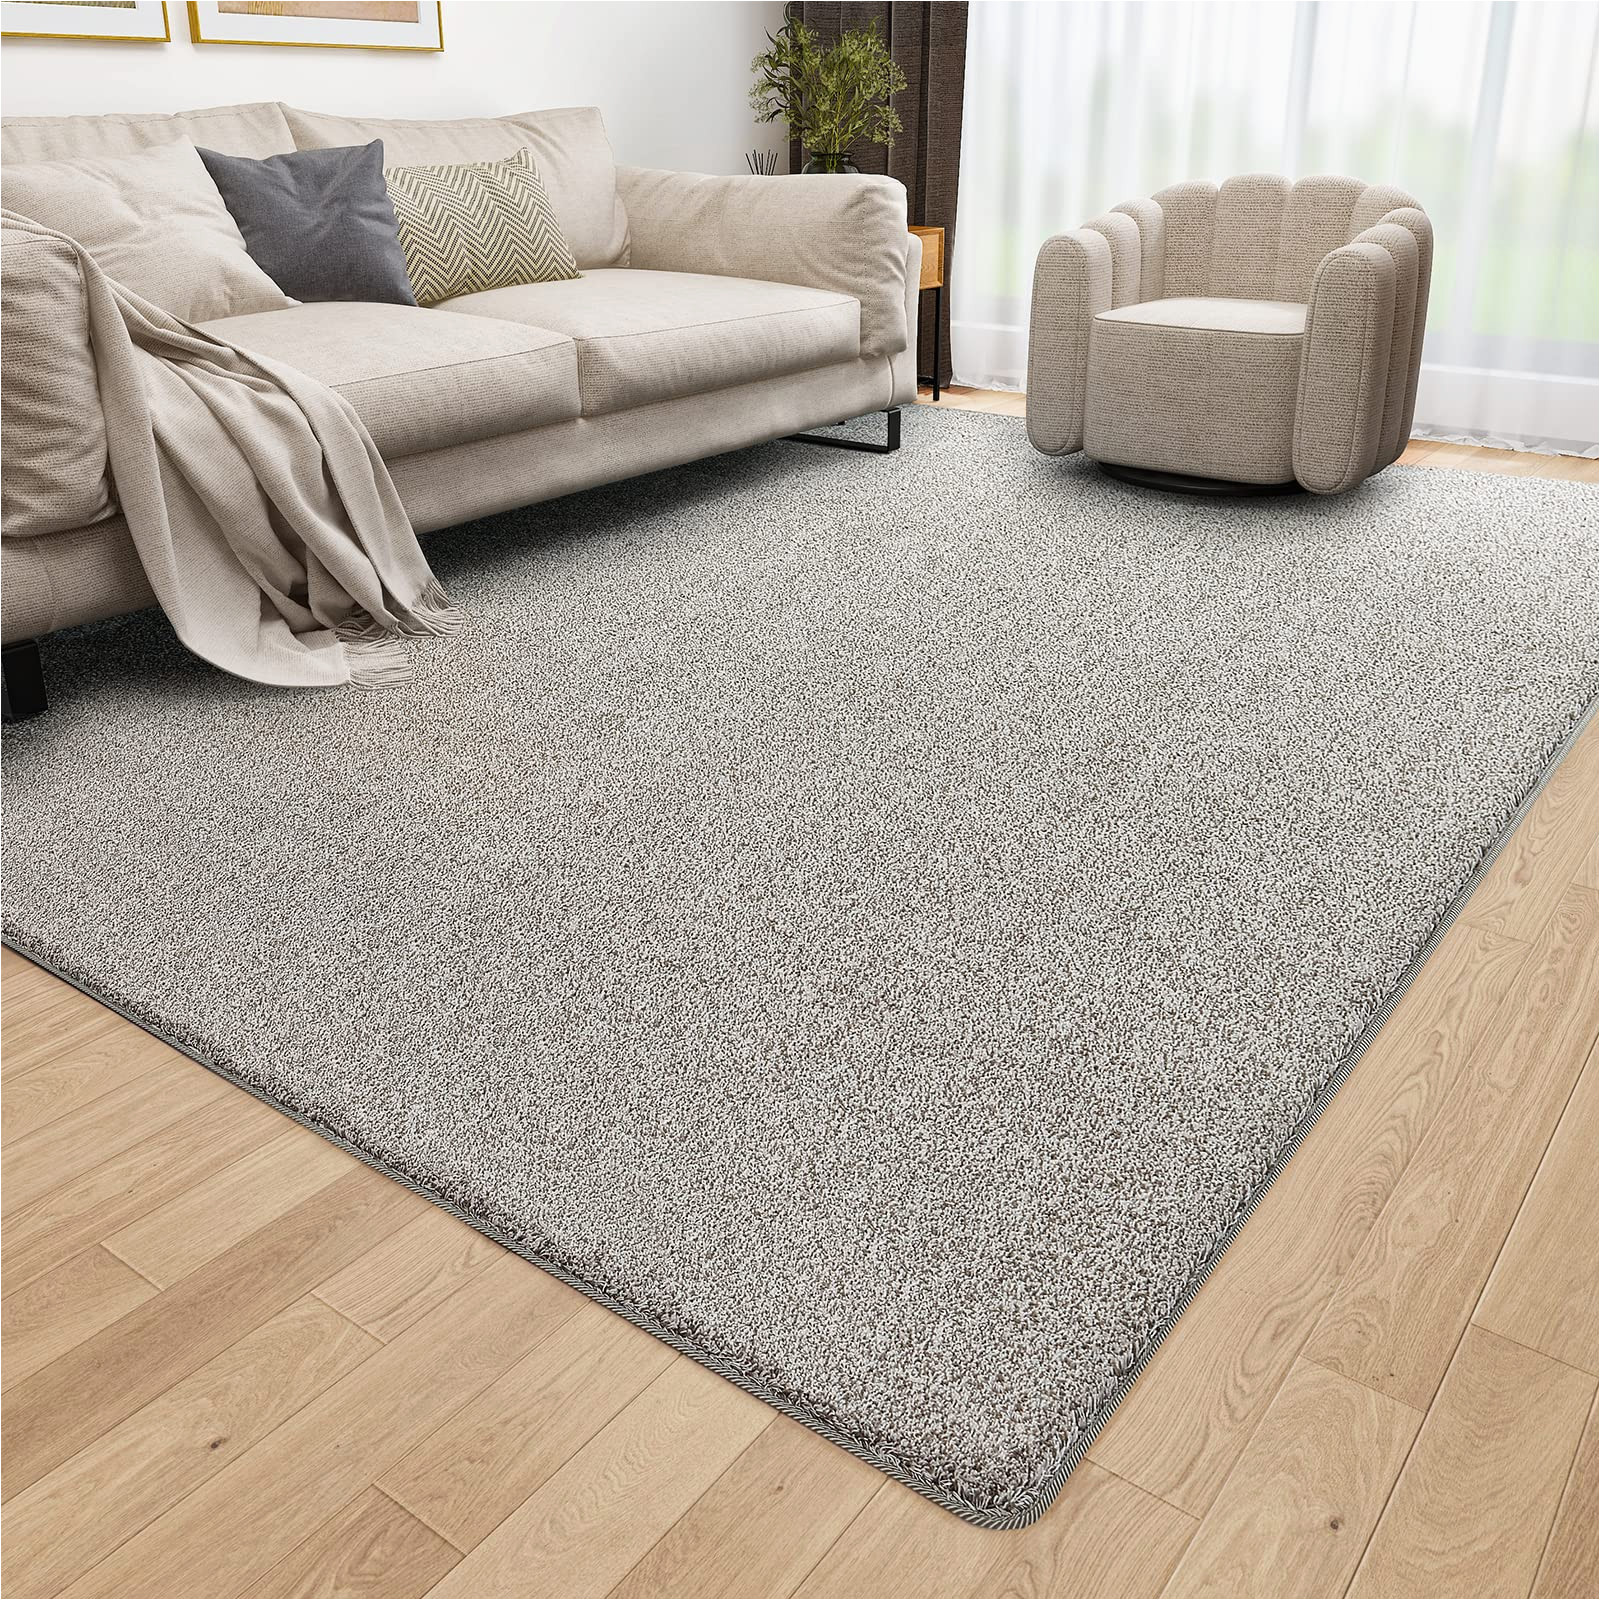 Modern area Rugs 4 X 6 Color G area Rugs, 4×6 Feet area Rugs for Living Room, soft Comfortable Large Rugs for Bedroom, Modern Floor Carpet, Non-slip Machine Washable Shag …